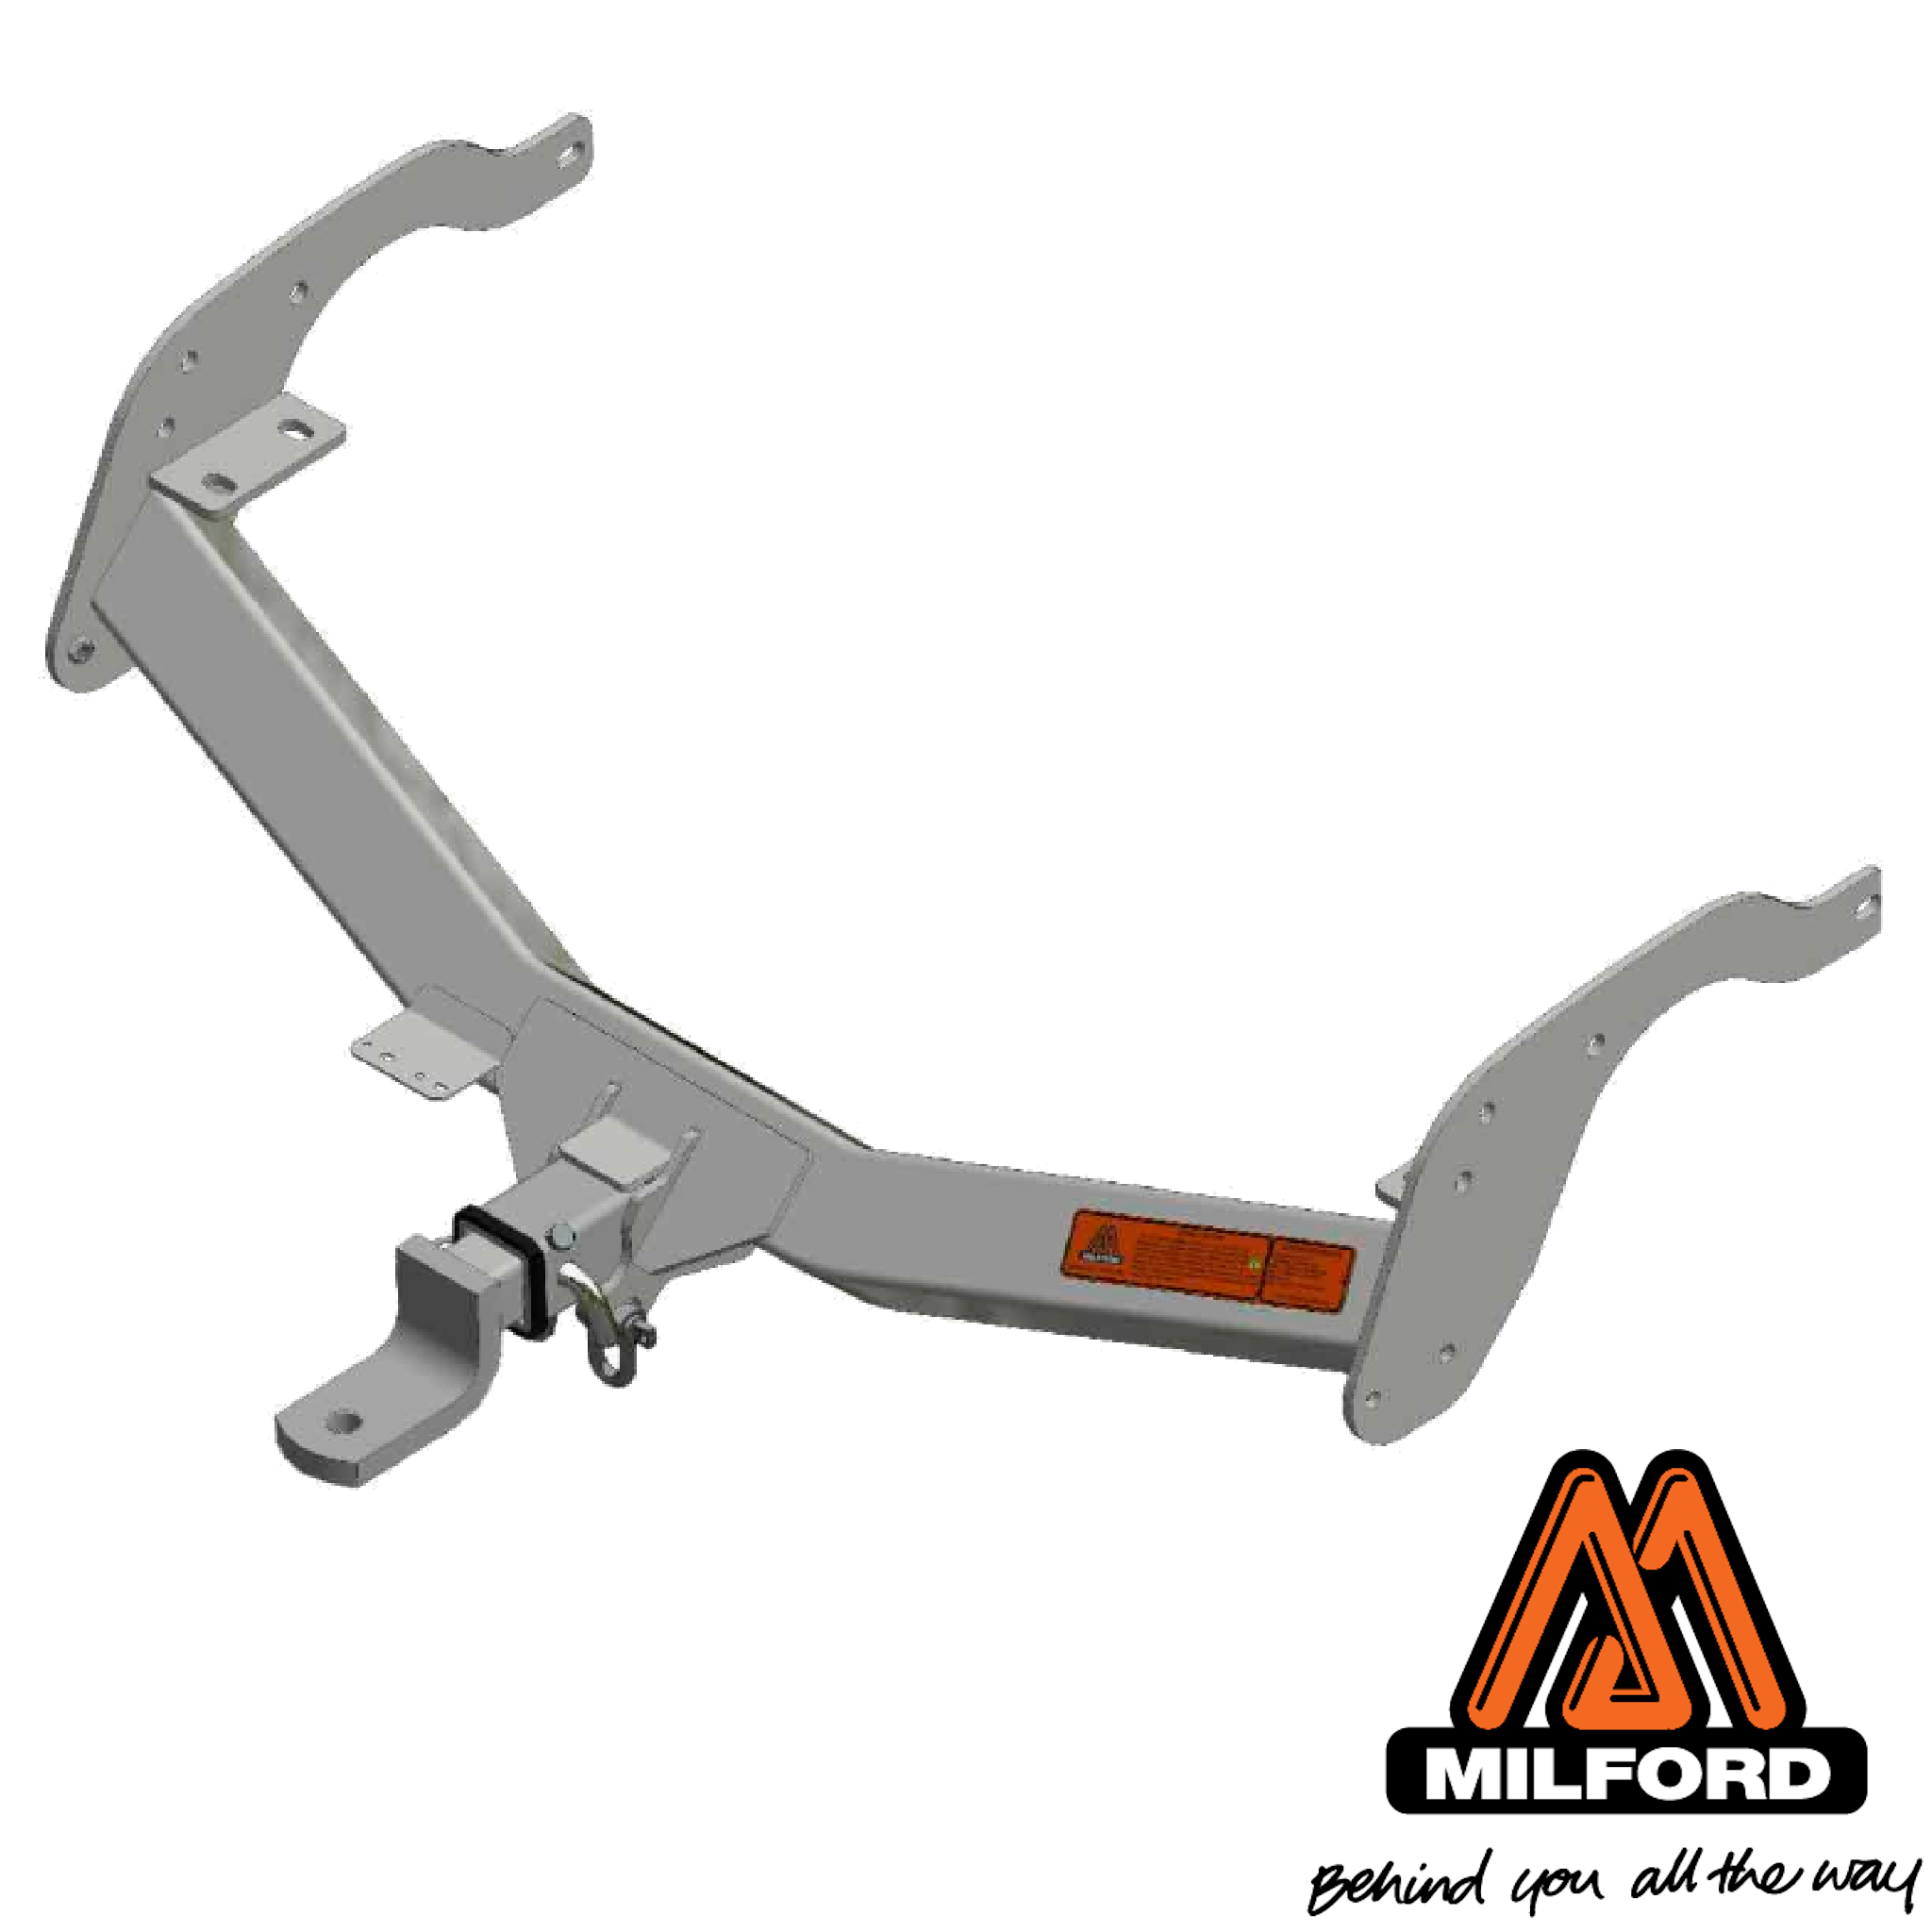 Ford Ranger Tub Body 08/2015 - 04/2022 (Relay Harness) (Oversize Spare) - Towbar Kit - Heavy Duty Oversize Spare